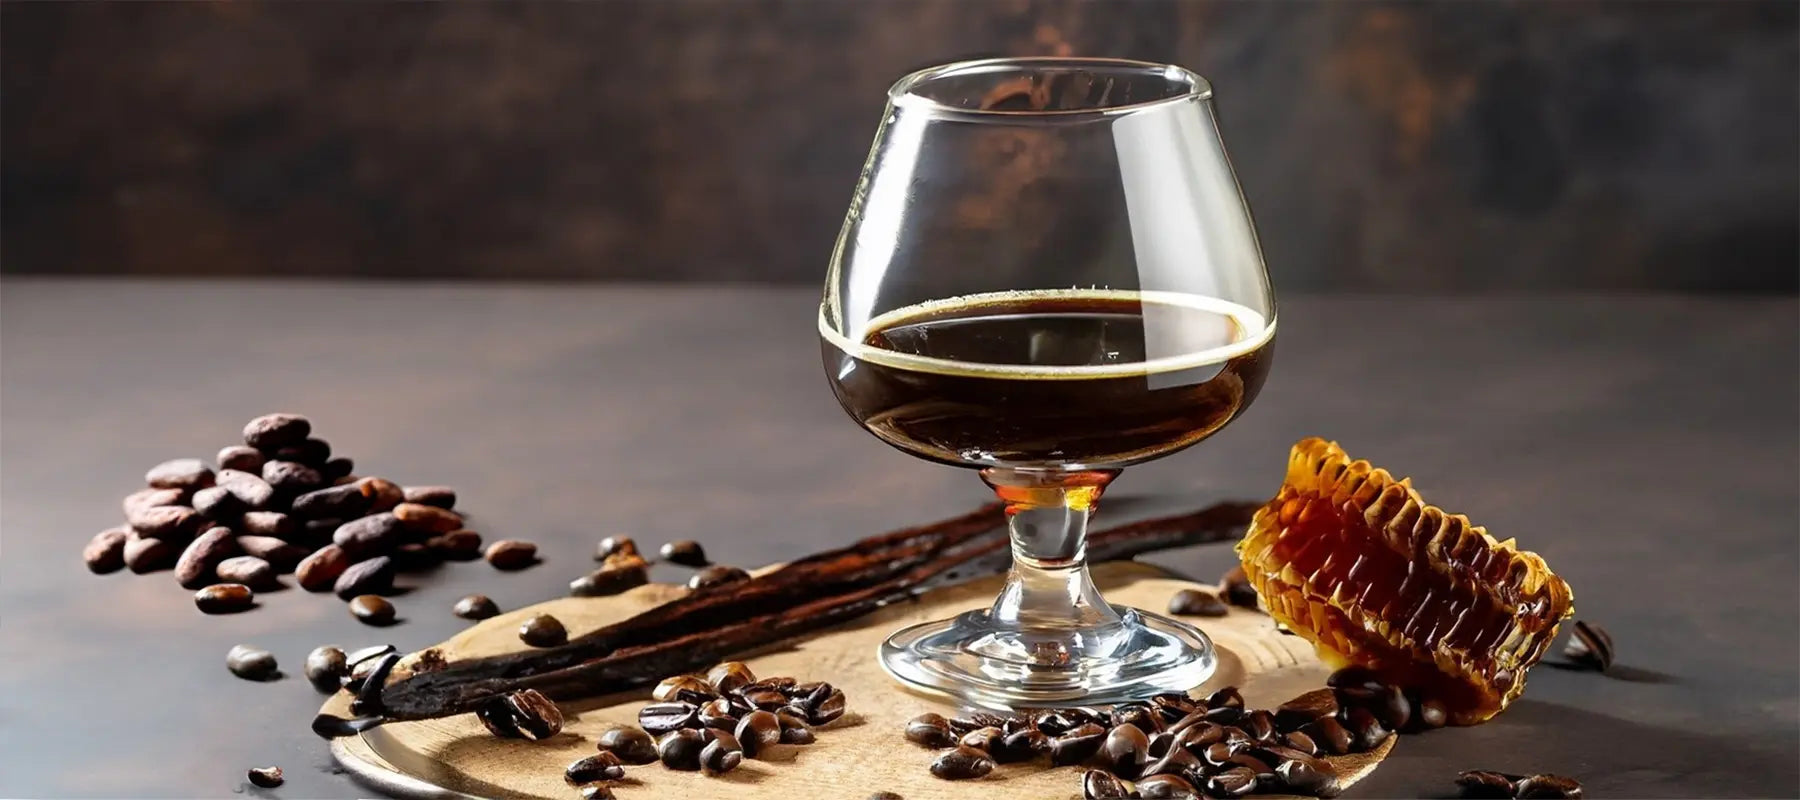 Photograph of a glass of MOCA, sparkling mead with cacao, coffee, and vanilla.